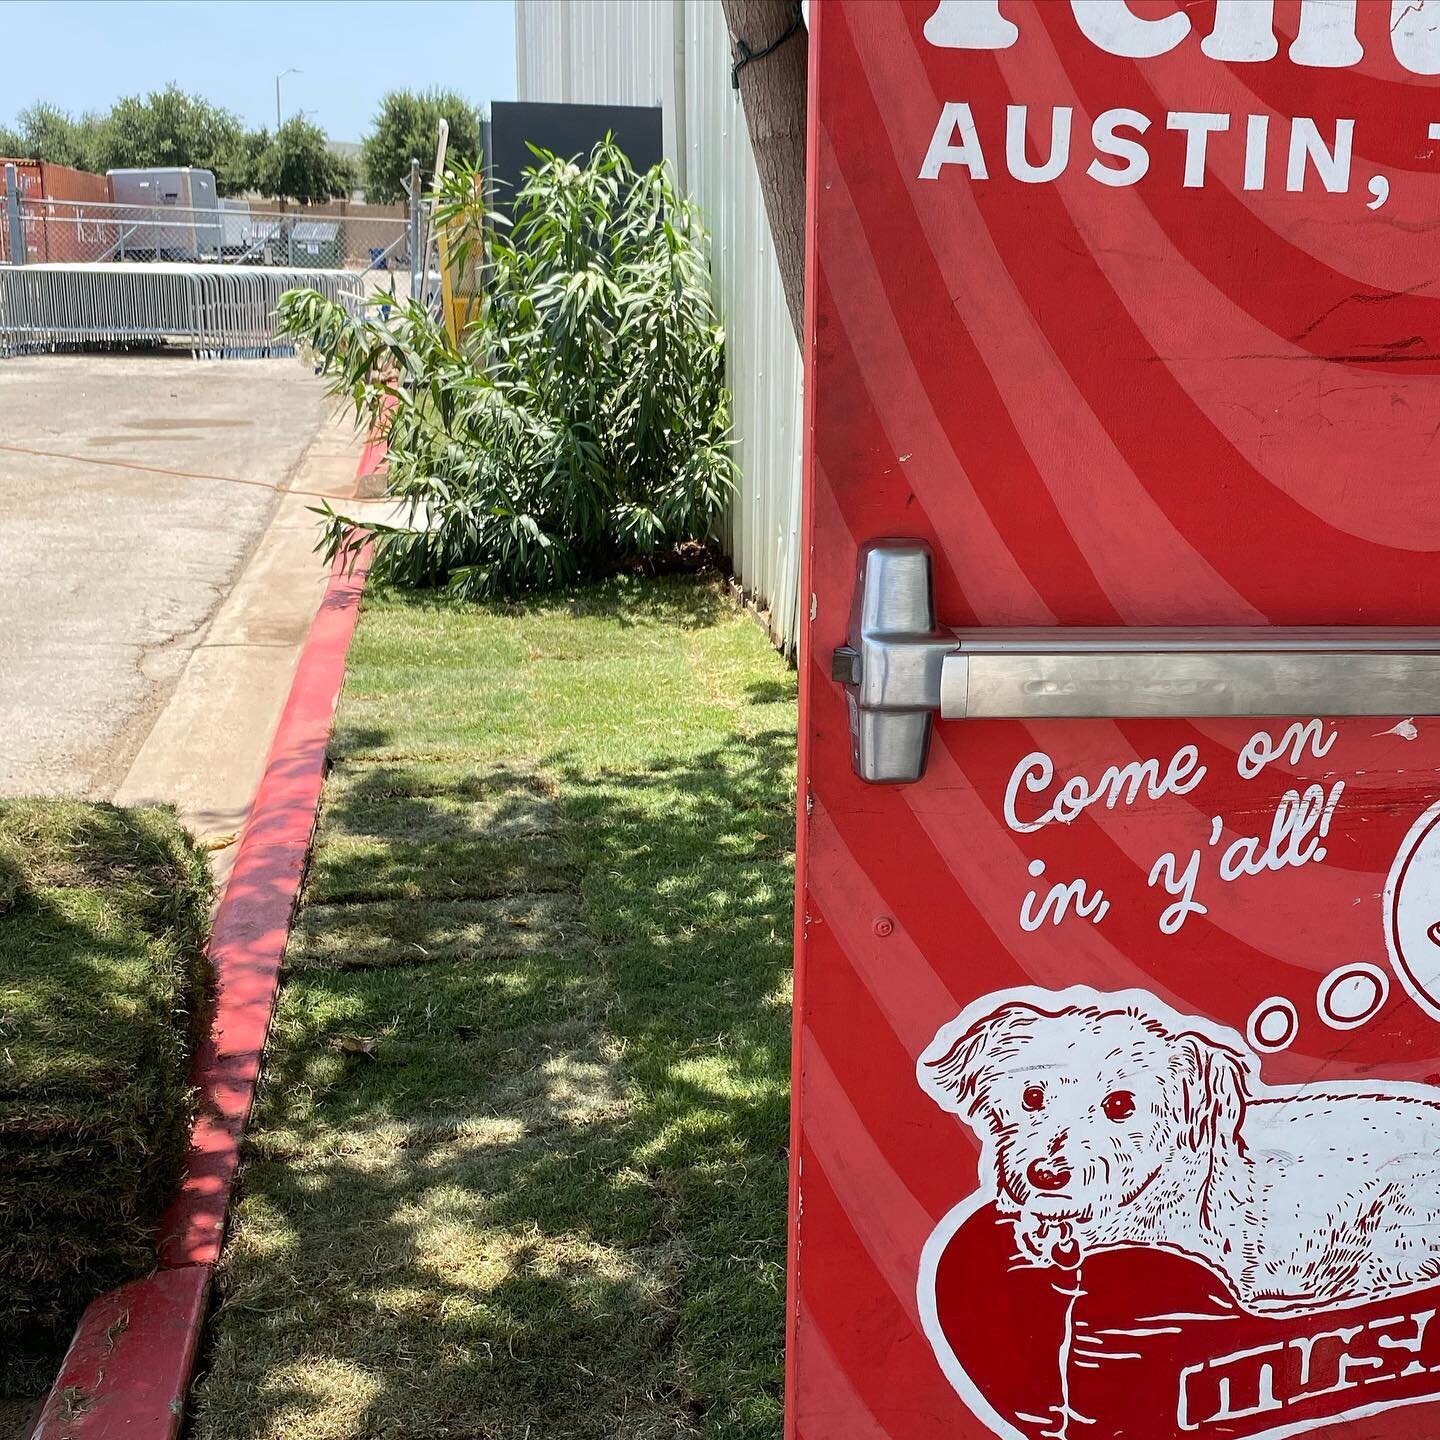 Our super hardworking and all-around incredible warehouse crew has been leaning into curb appeal this week and we got a really cute patch of grass out of it. 💚💚💚

Swipe to see where we started! And check out where we are now!